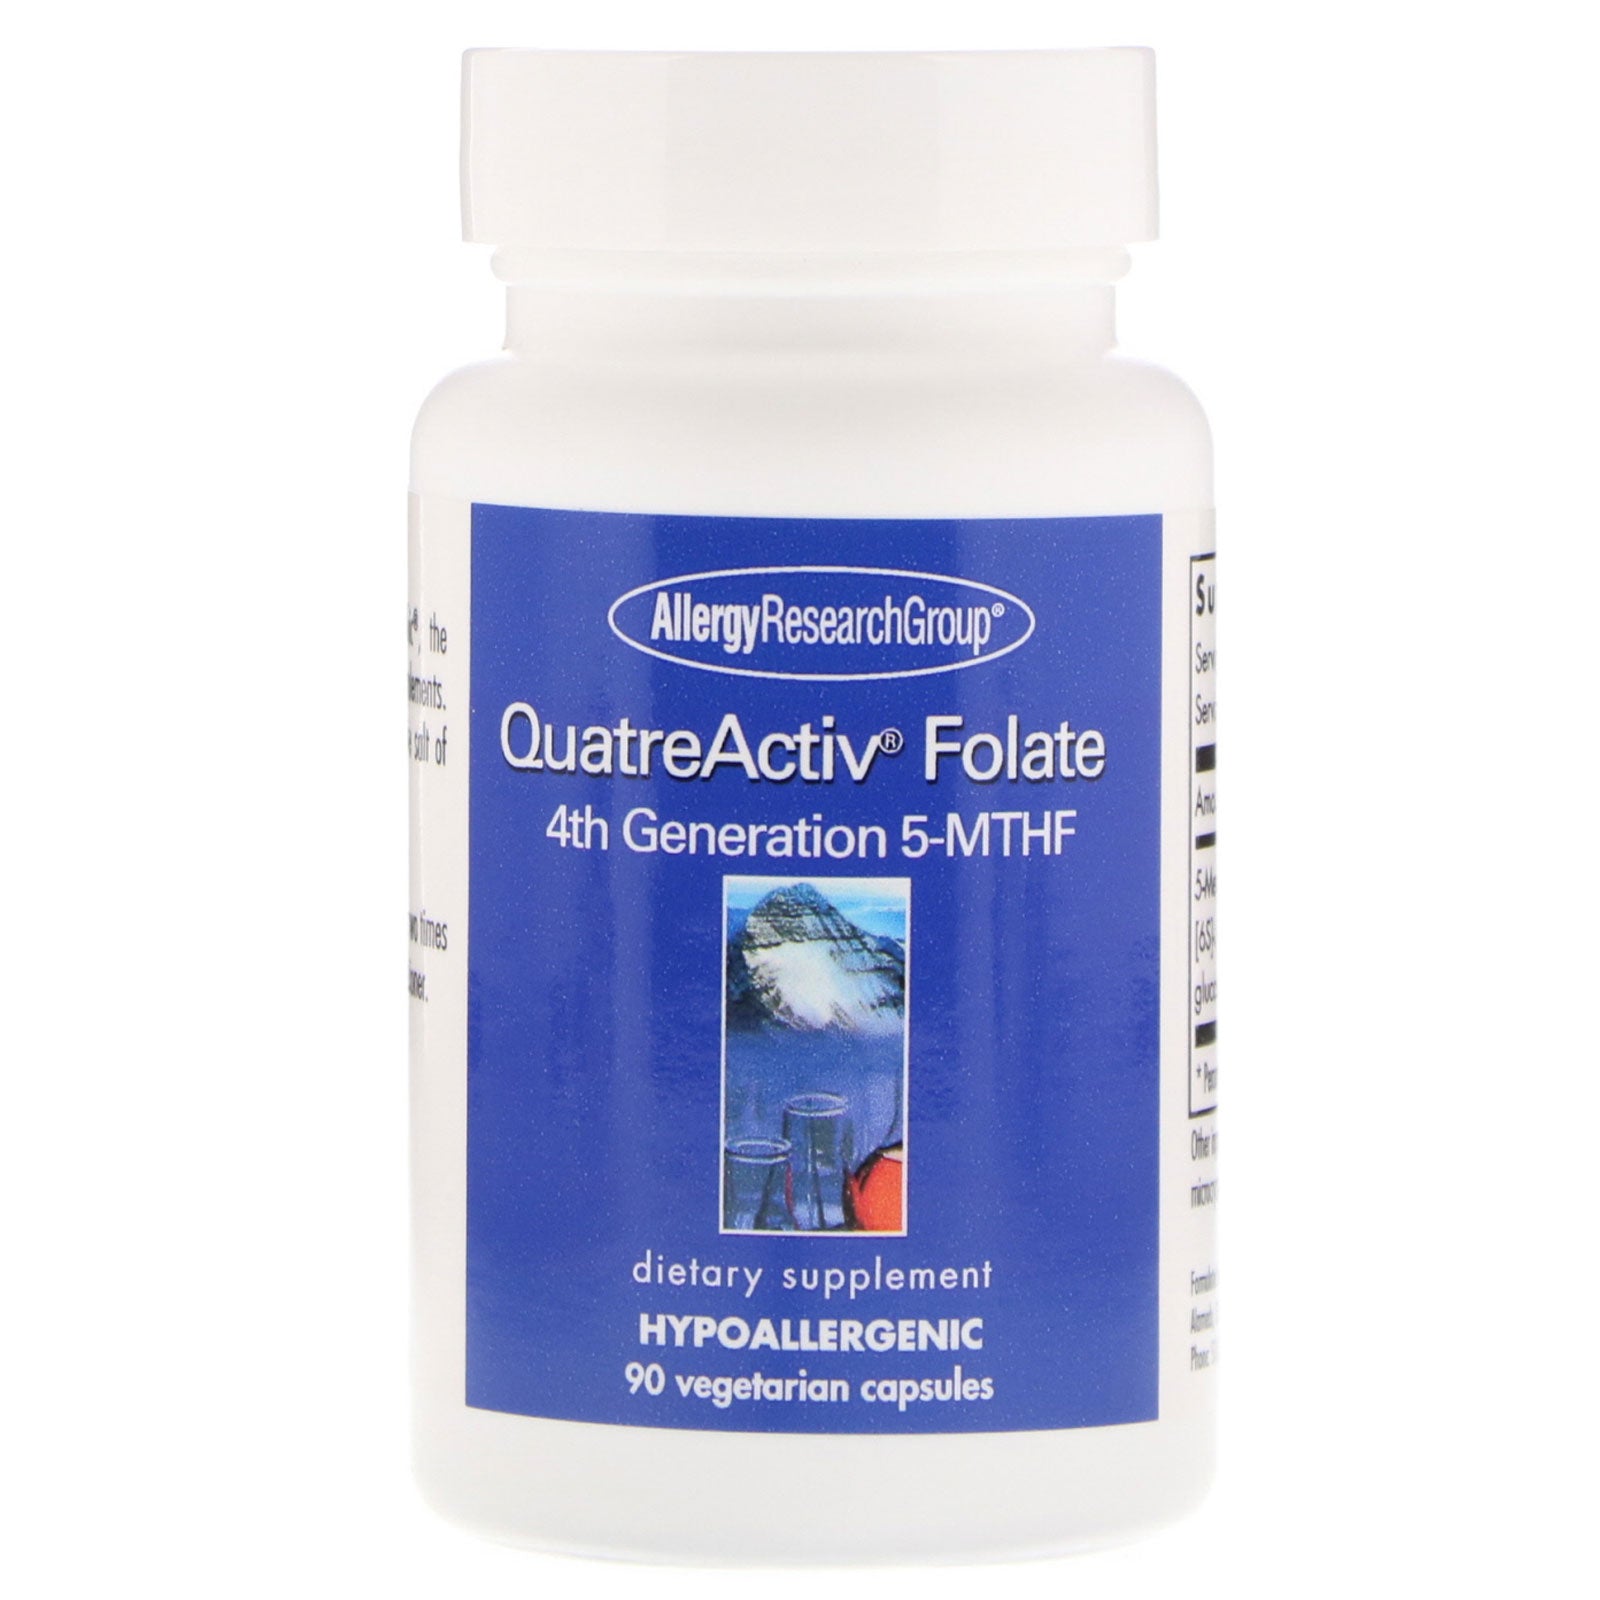 Allergy Research Group, QuatreActiv Folate, 4th Generation 5-MTHF, 90 Vegetarian Capsules